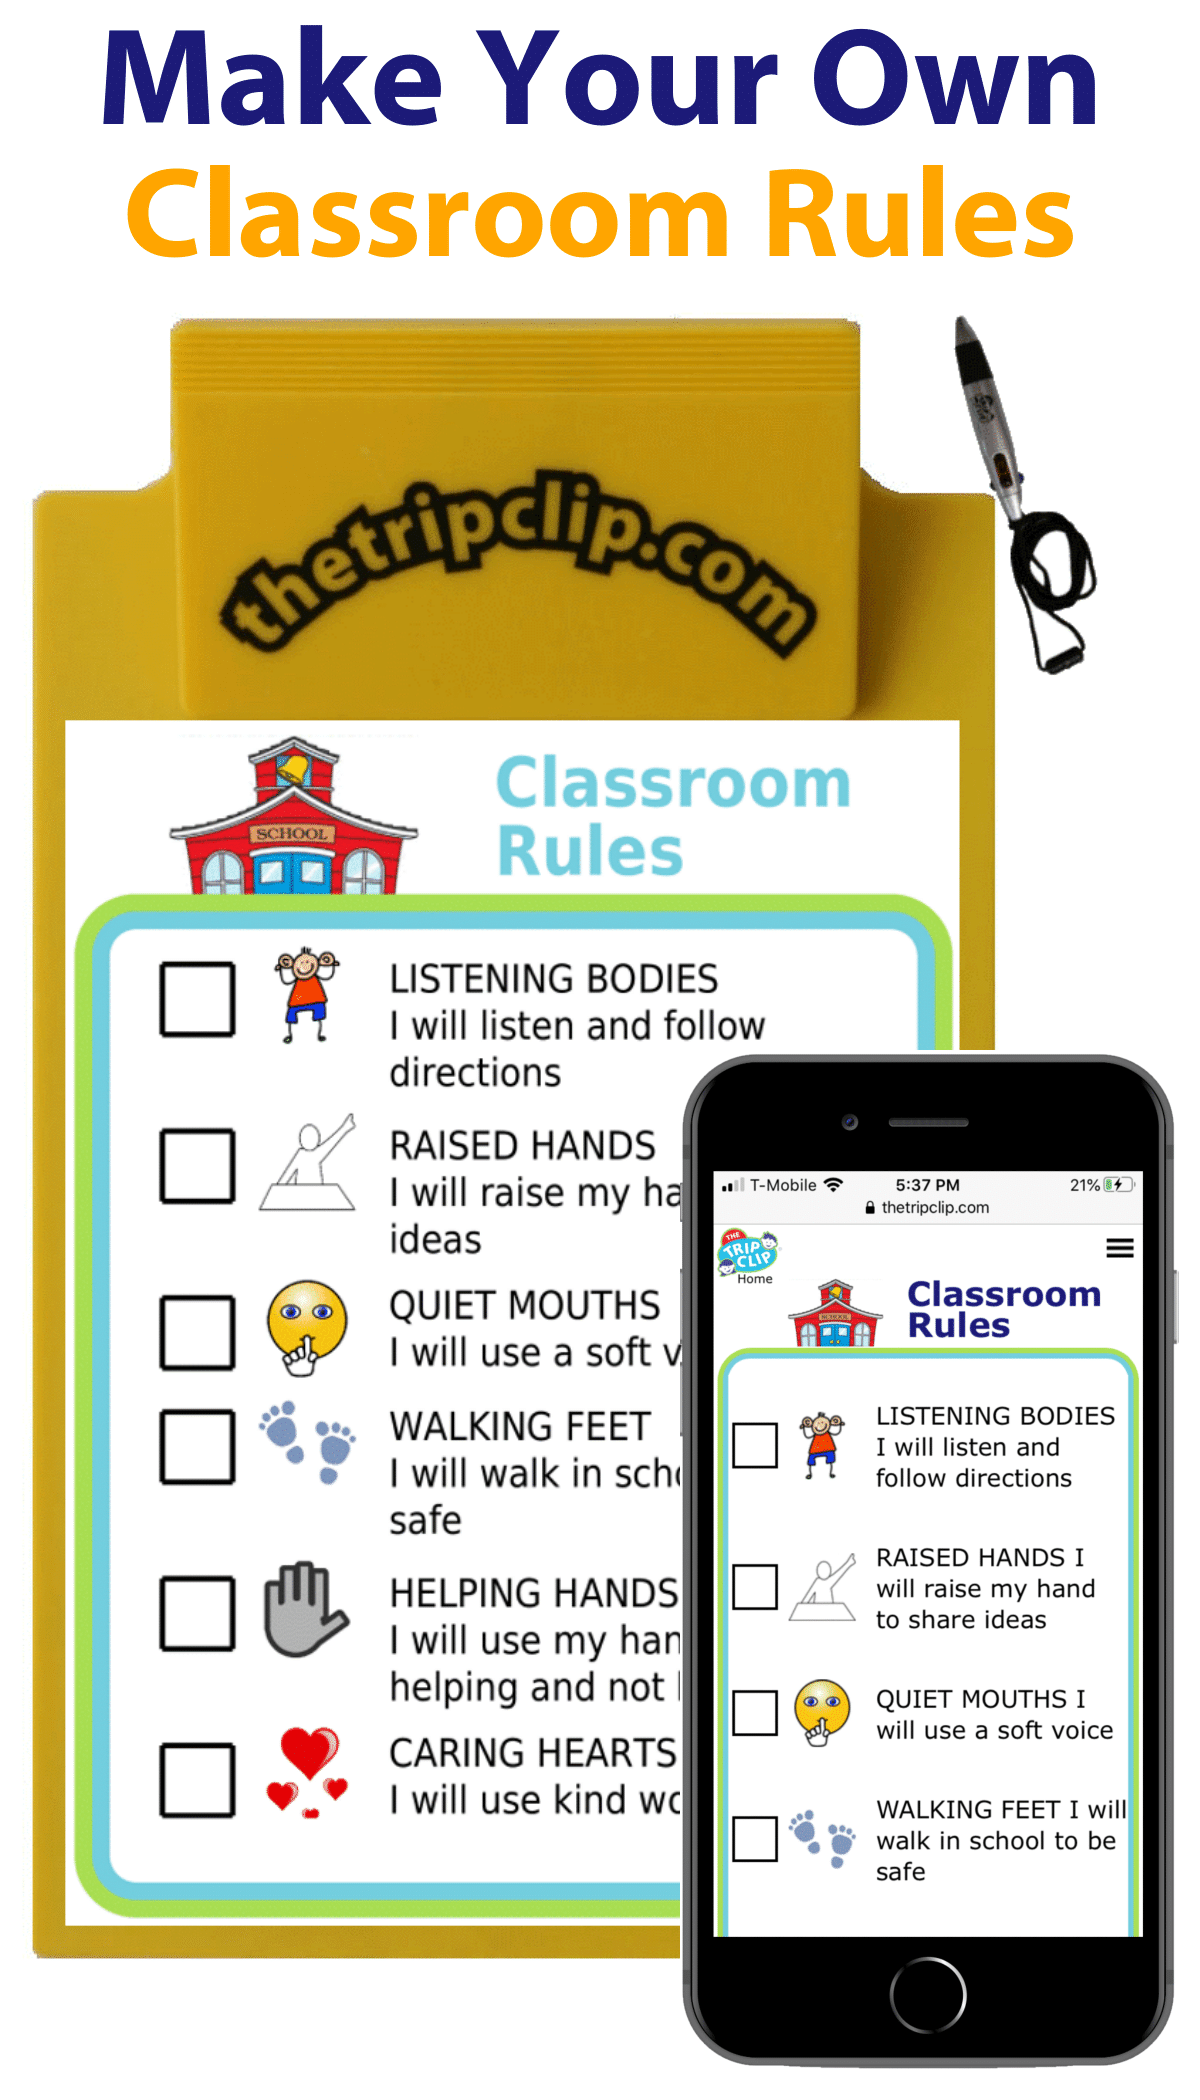 Picture checklist showing classroom rules